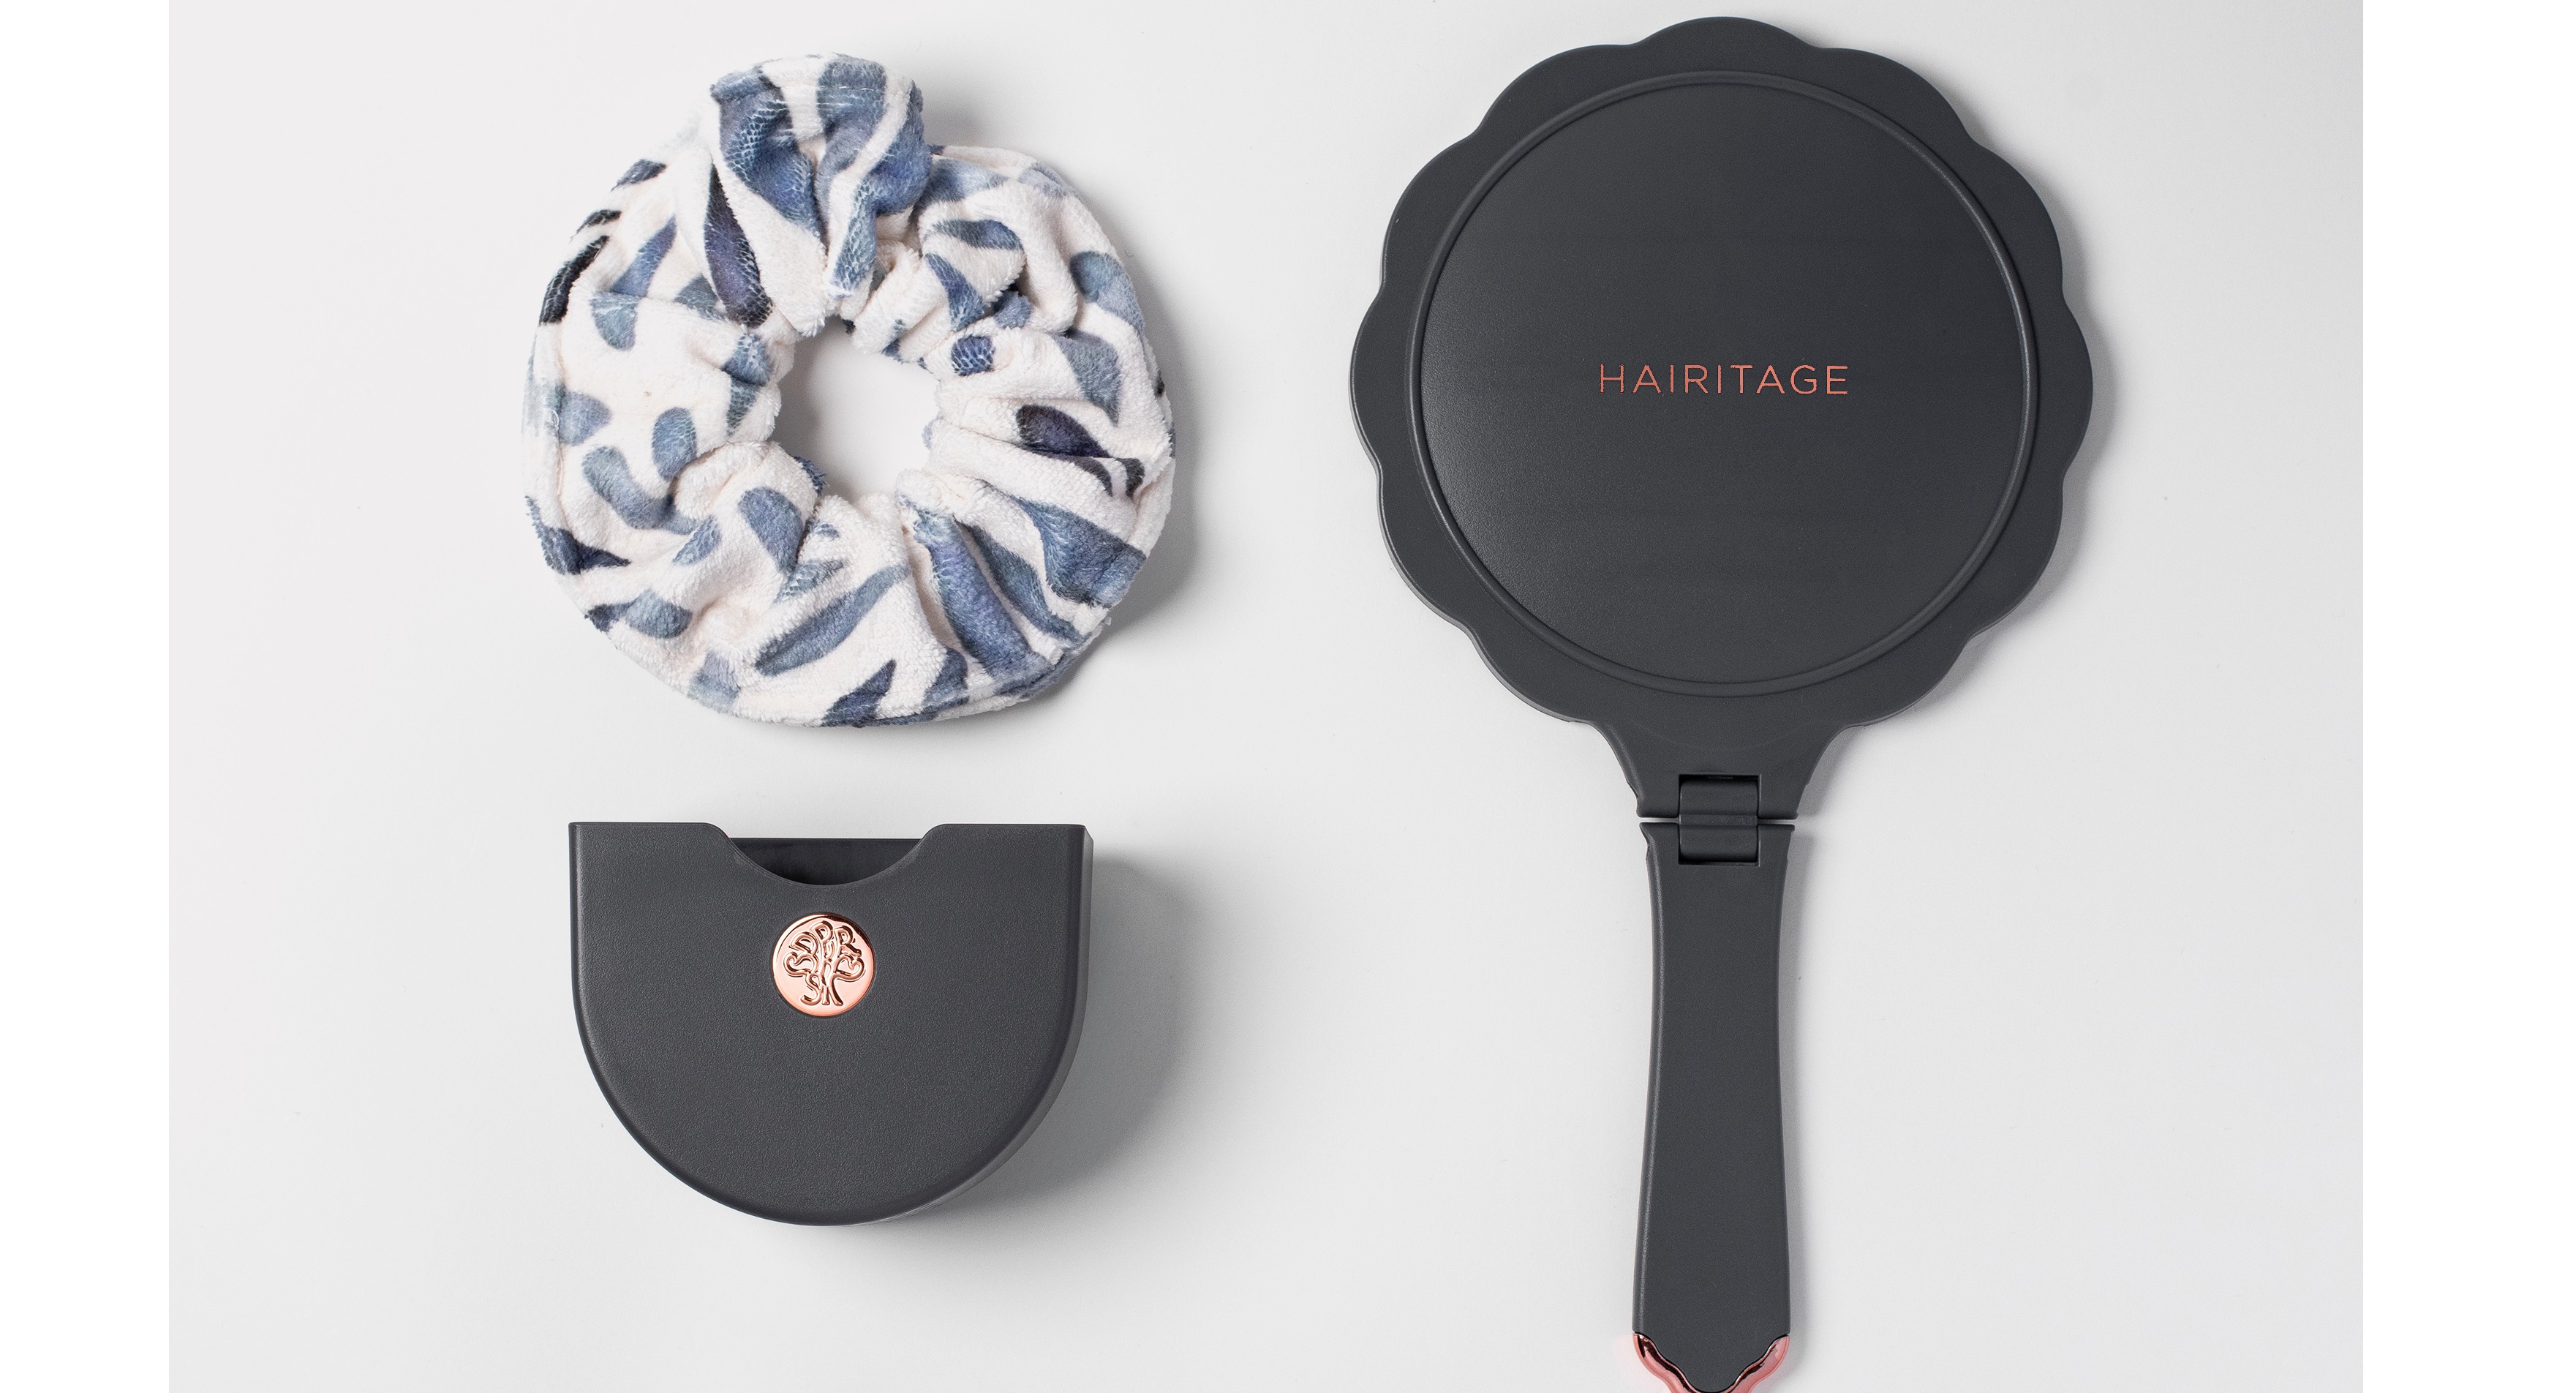 YouTuber Mindy McKnight’s Vegan Hair Care Brand Hairitage by Mindy Expands Retail Footprint with New Tools, Accessories 